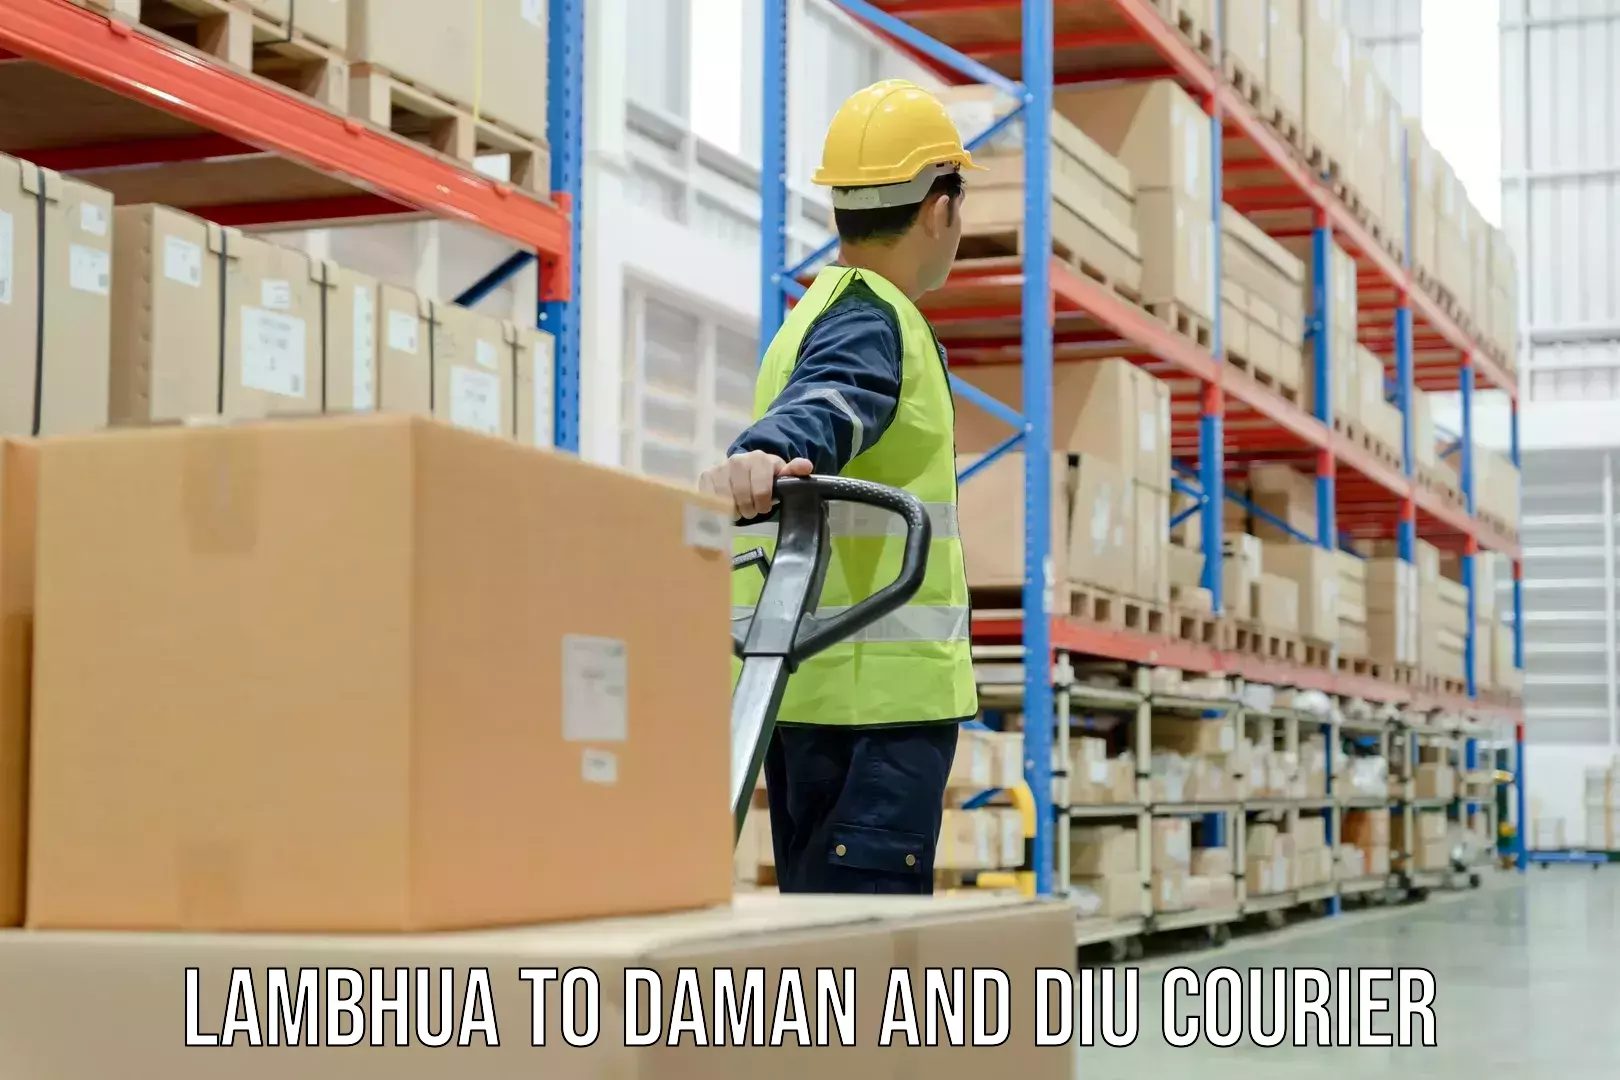 Multi-national courier services Lambhua to Daman and Diu